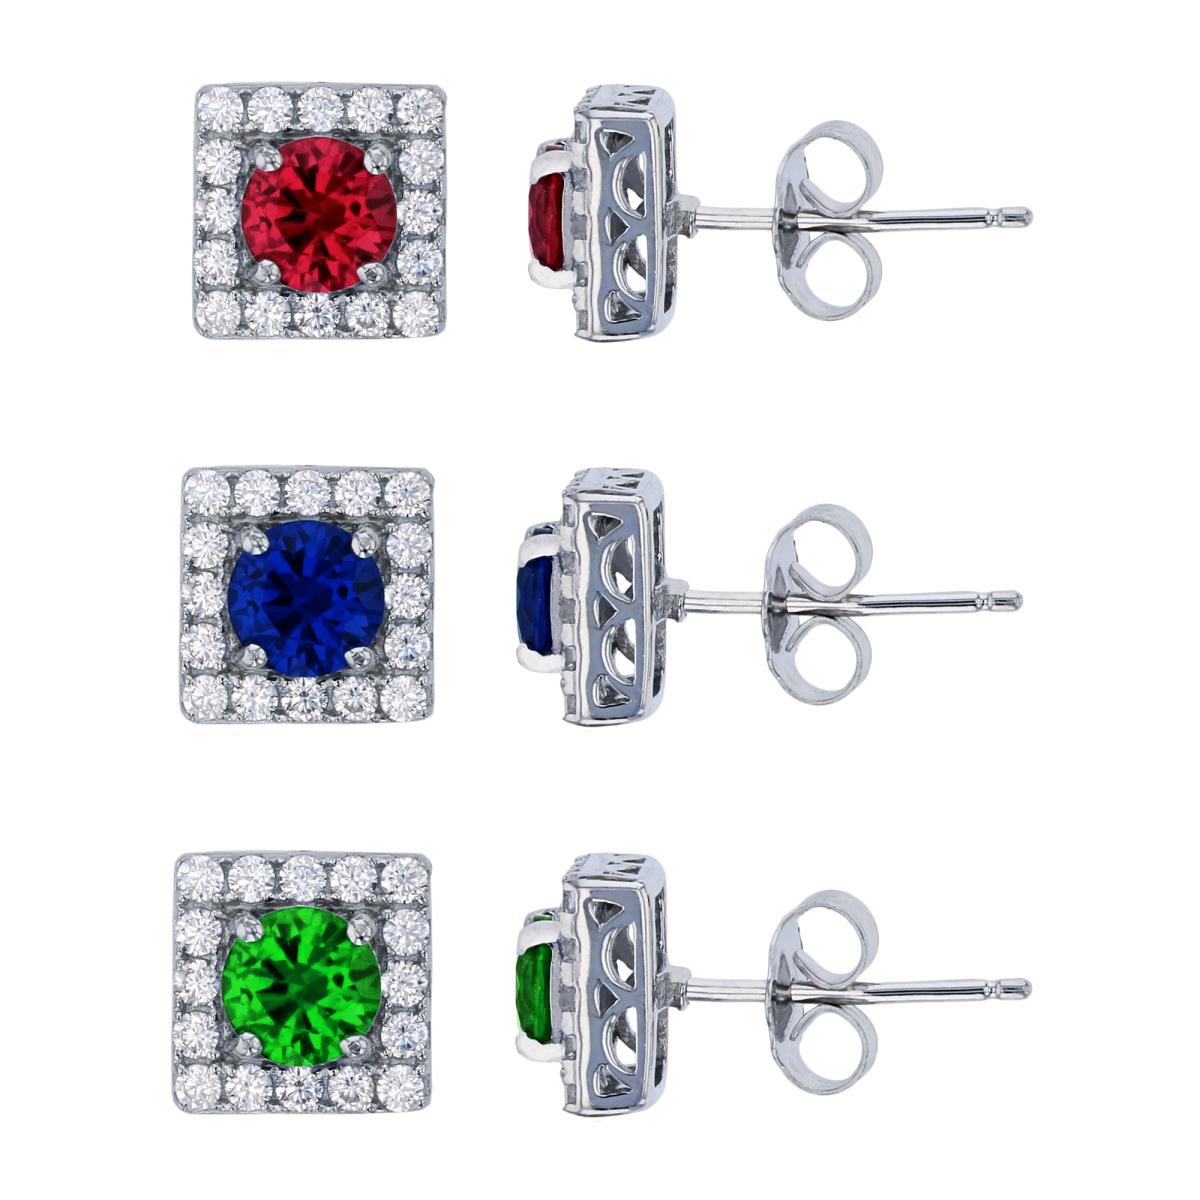 Sterling Silver Rhodium Pave 5mm Rd Blue Sapphire, Ruby & Green CZ Square Stud Earring Set 